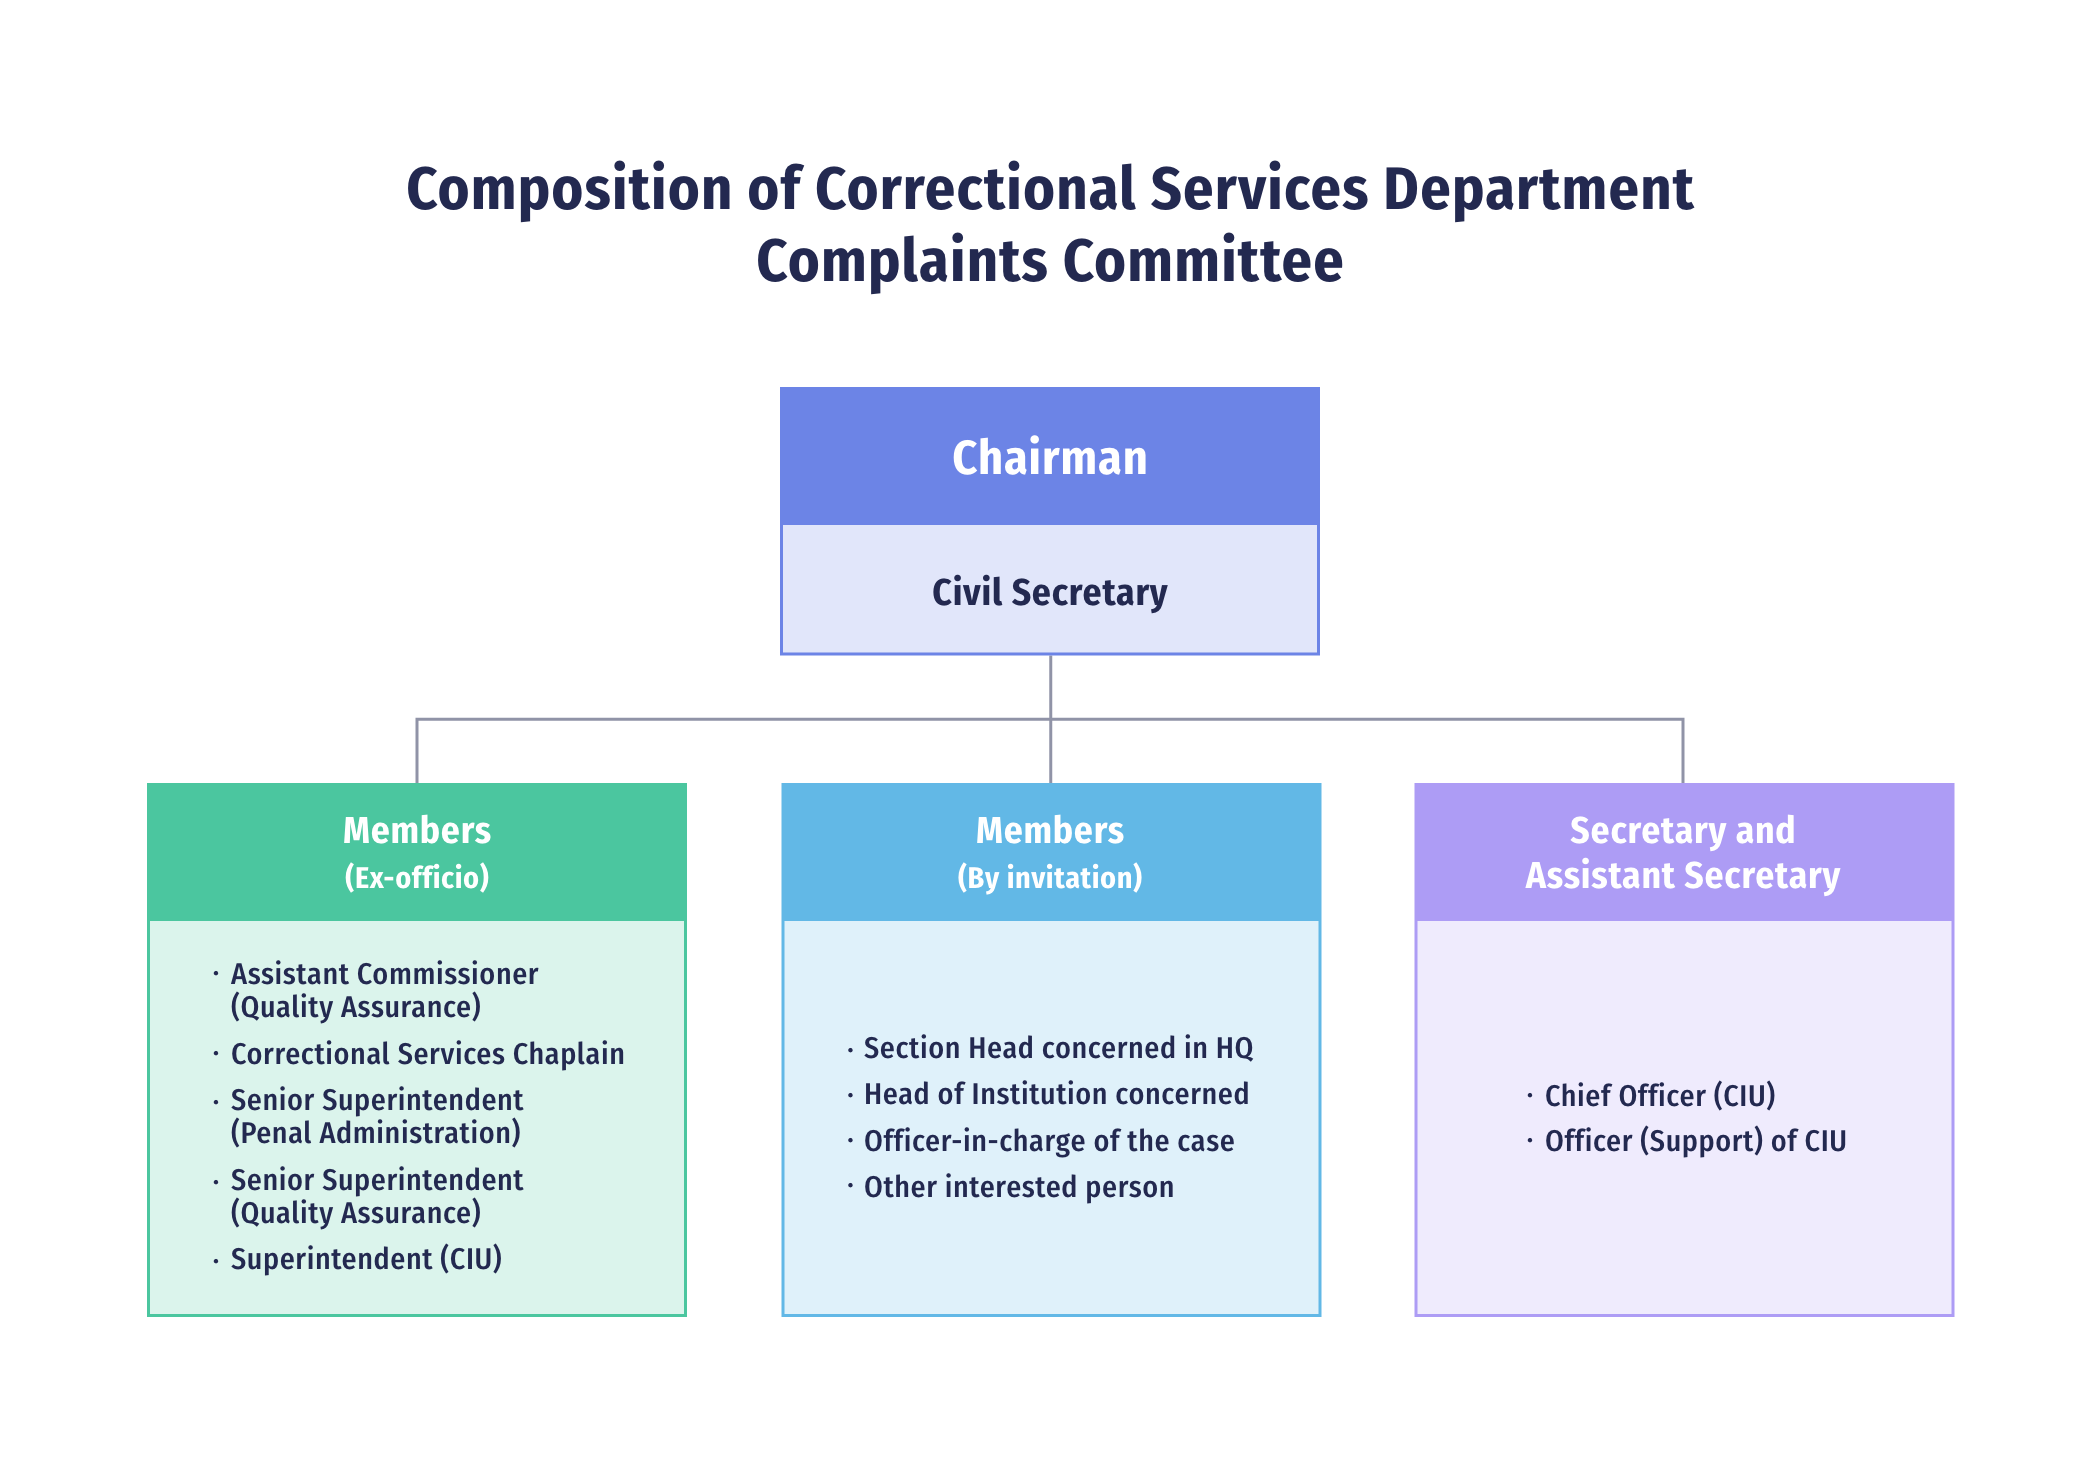 Composition of Correctional Services Department Complaints Committee